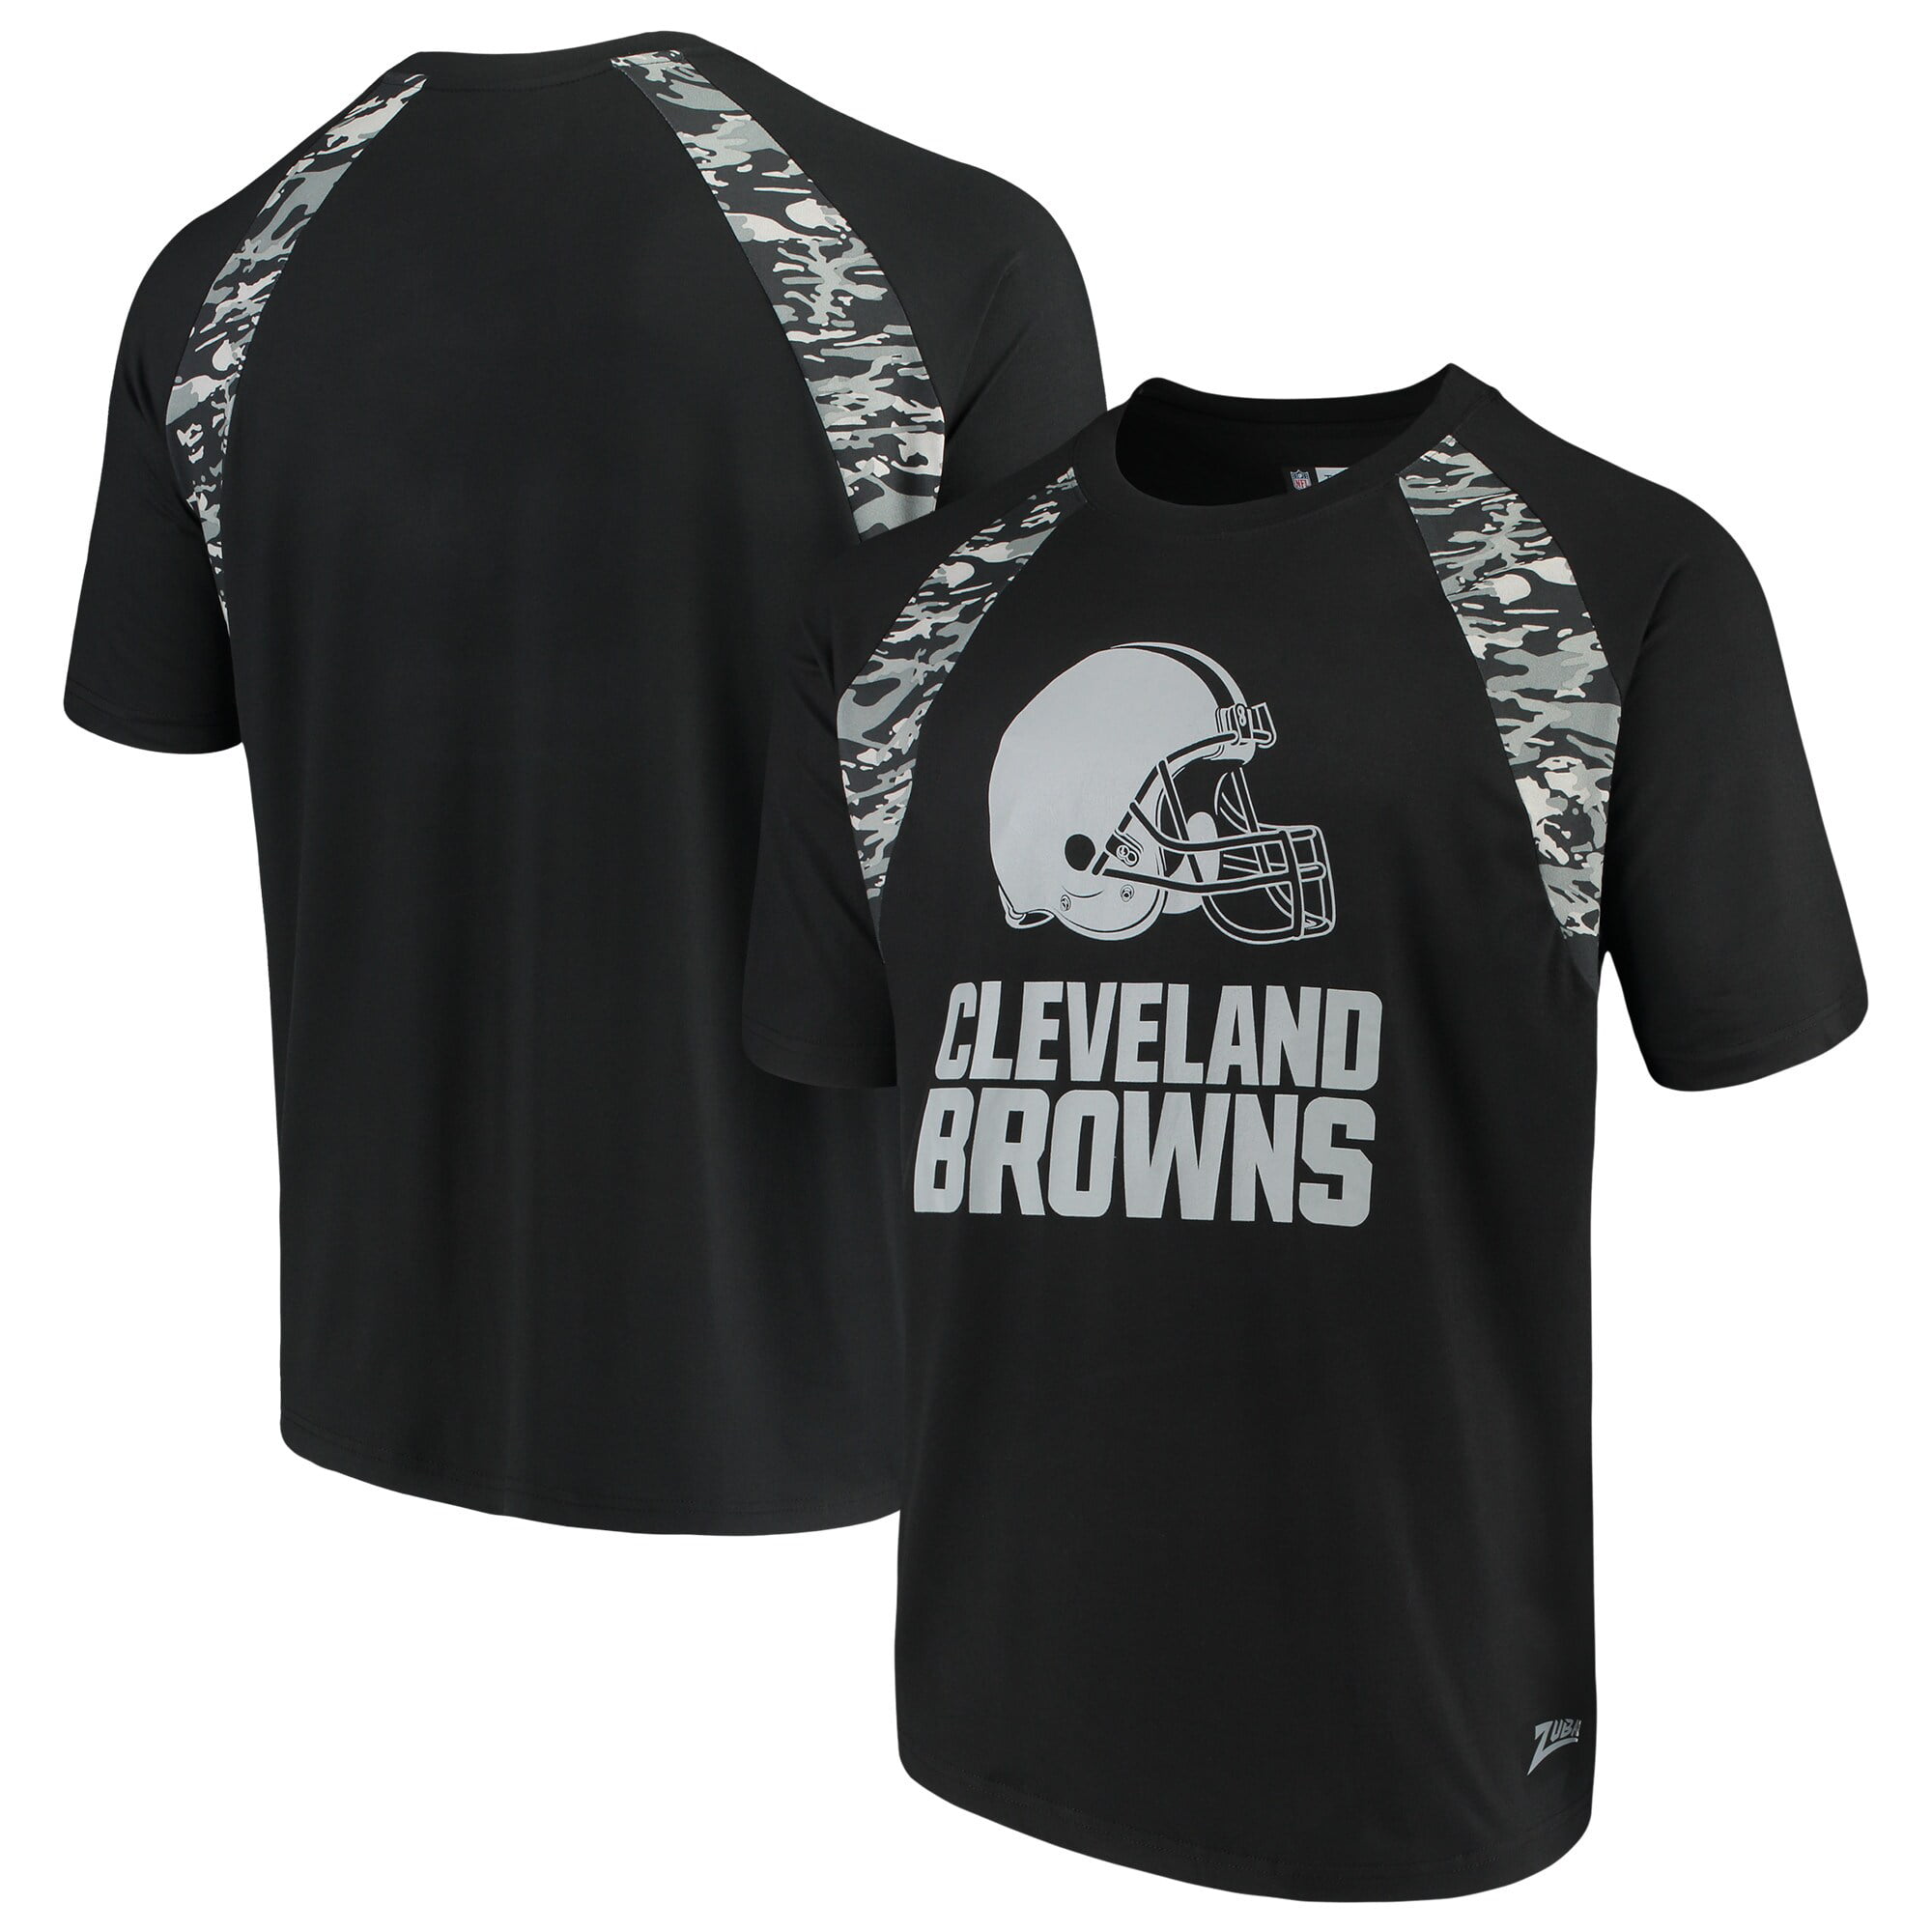 cleveland browns camo jersey